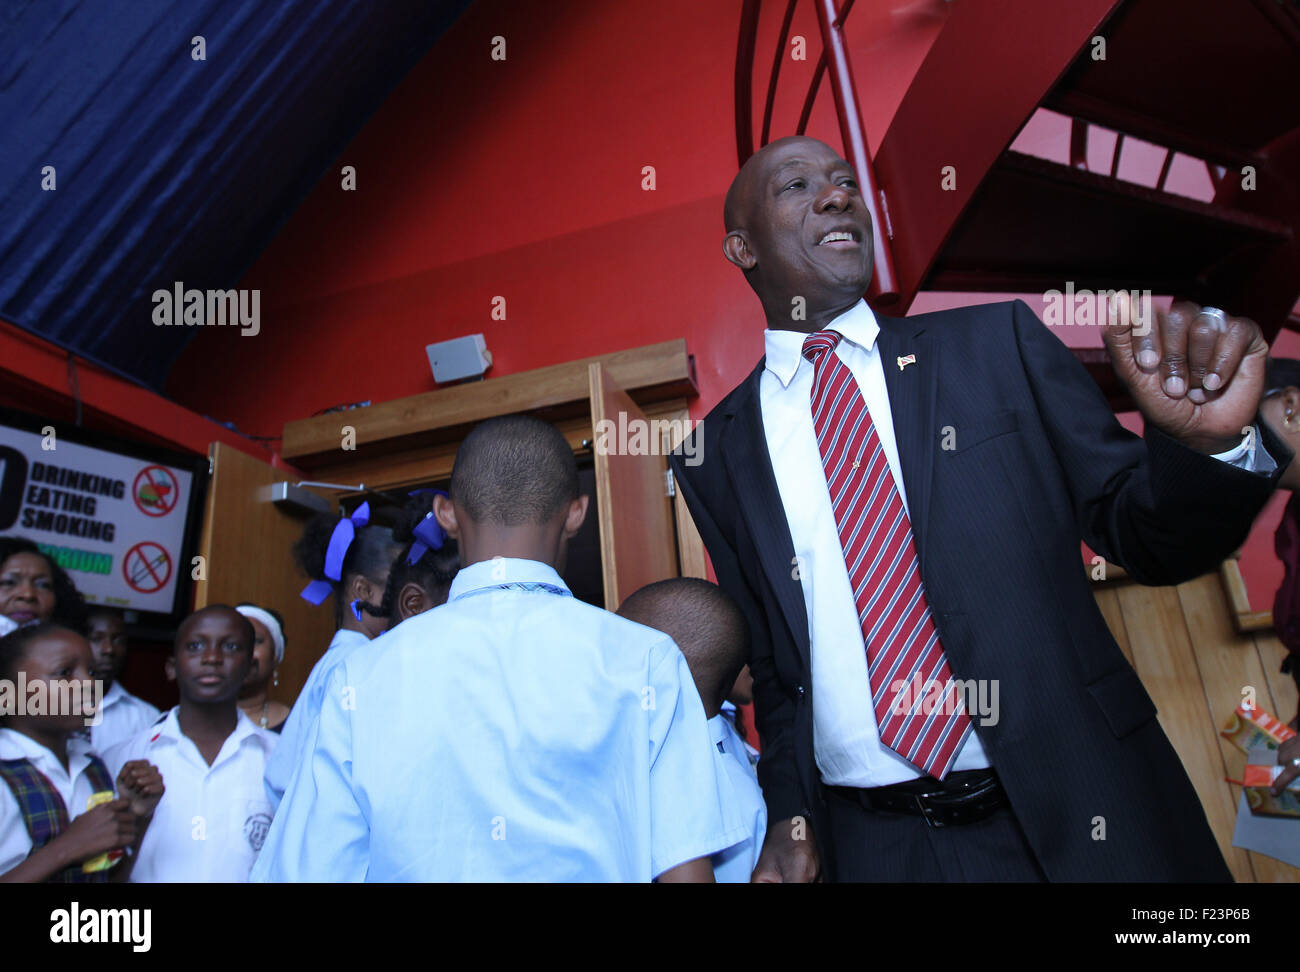 Port of Spain, Trinidad & Tobago. 9th September, 2015. Keith Christopher Rowley (R), Prime Minister of Trinidad & Tobago, dances with school students at his swearing-in ceremony at Queen's Hall in Port of Spain, Trinidad on September 9, 2015.  (Photo: Sean Drakes/Alamy Live News) Credit:  SEAN DRAKES/Alamy Live News Stock Photo